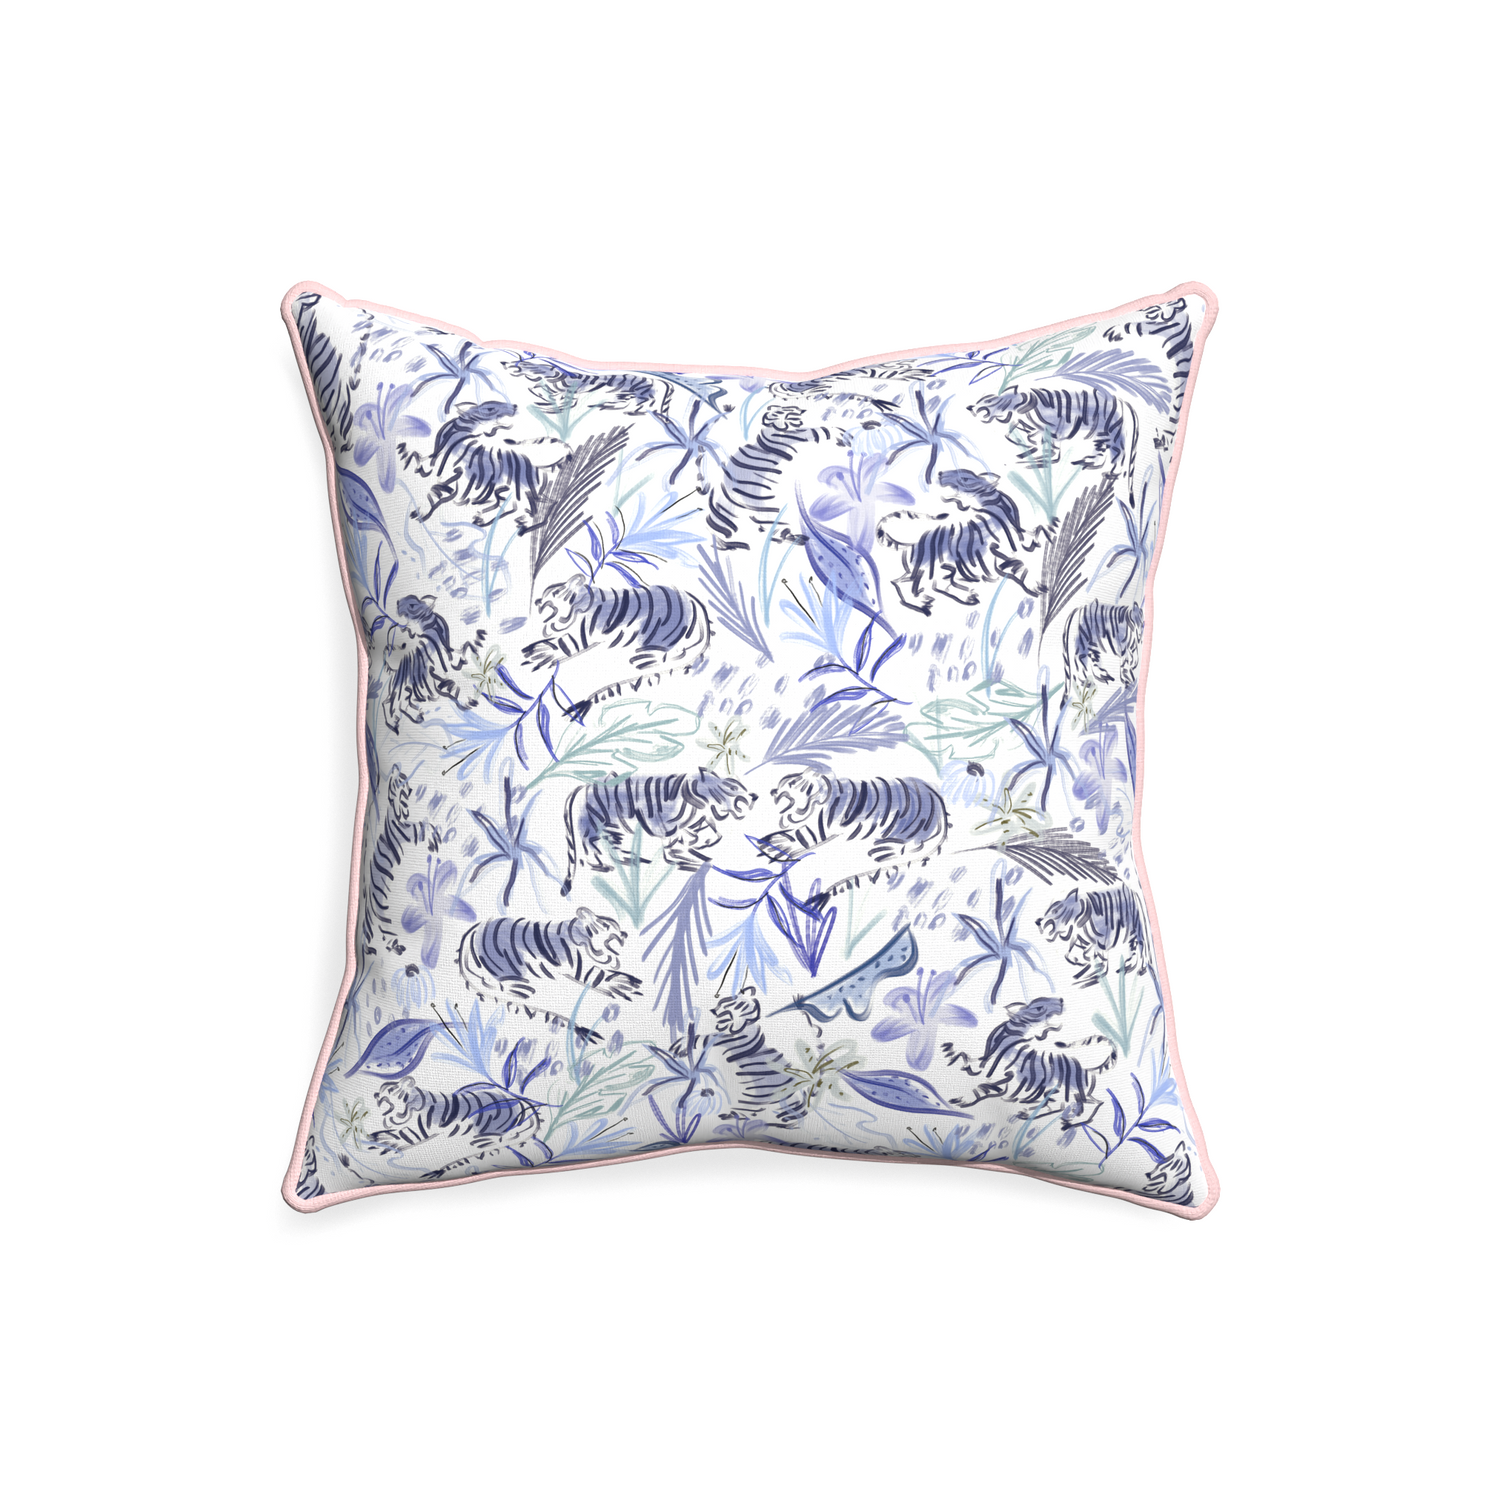 20-square frida blue custom blue with intricate tiger designpillow with petal piping on white background